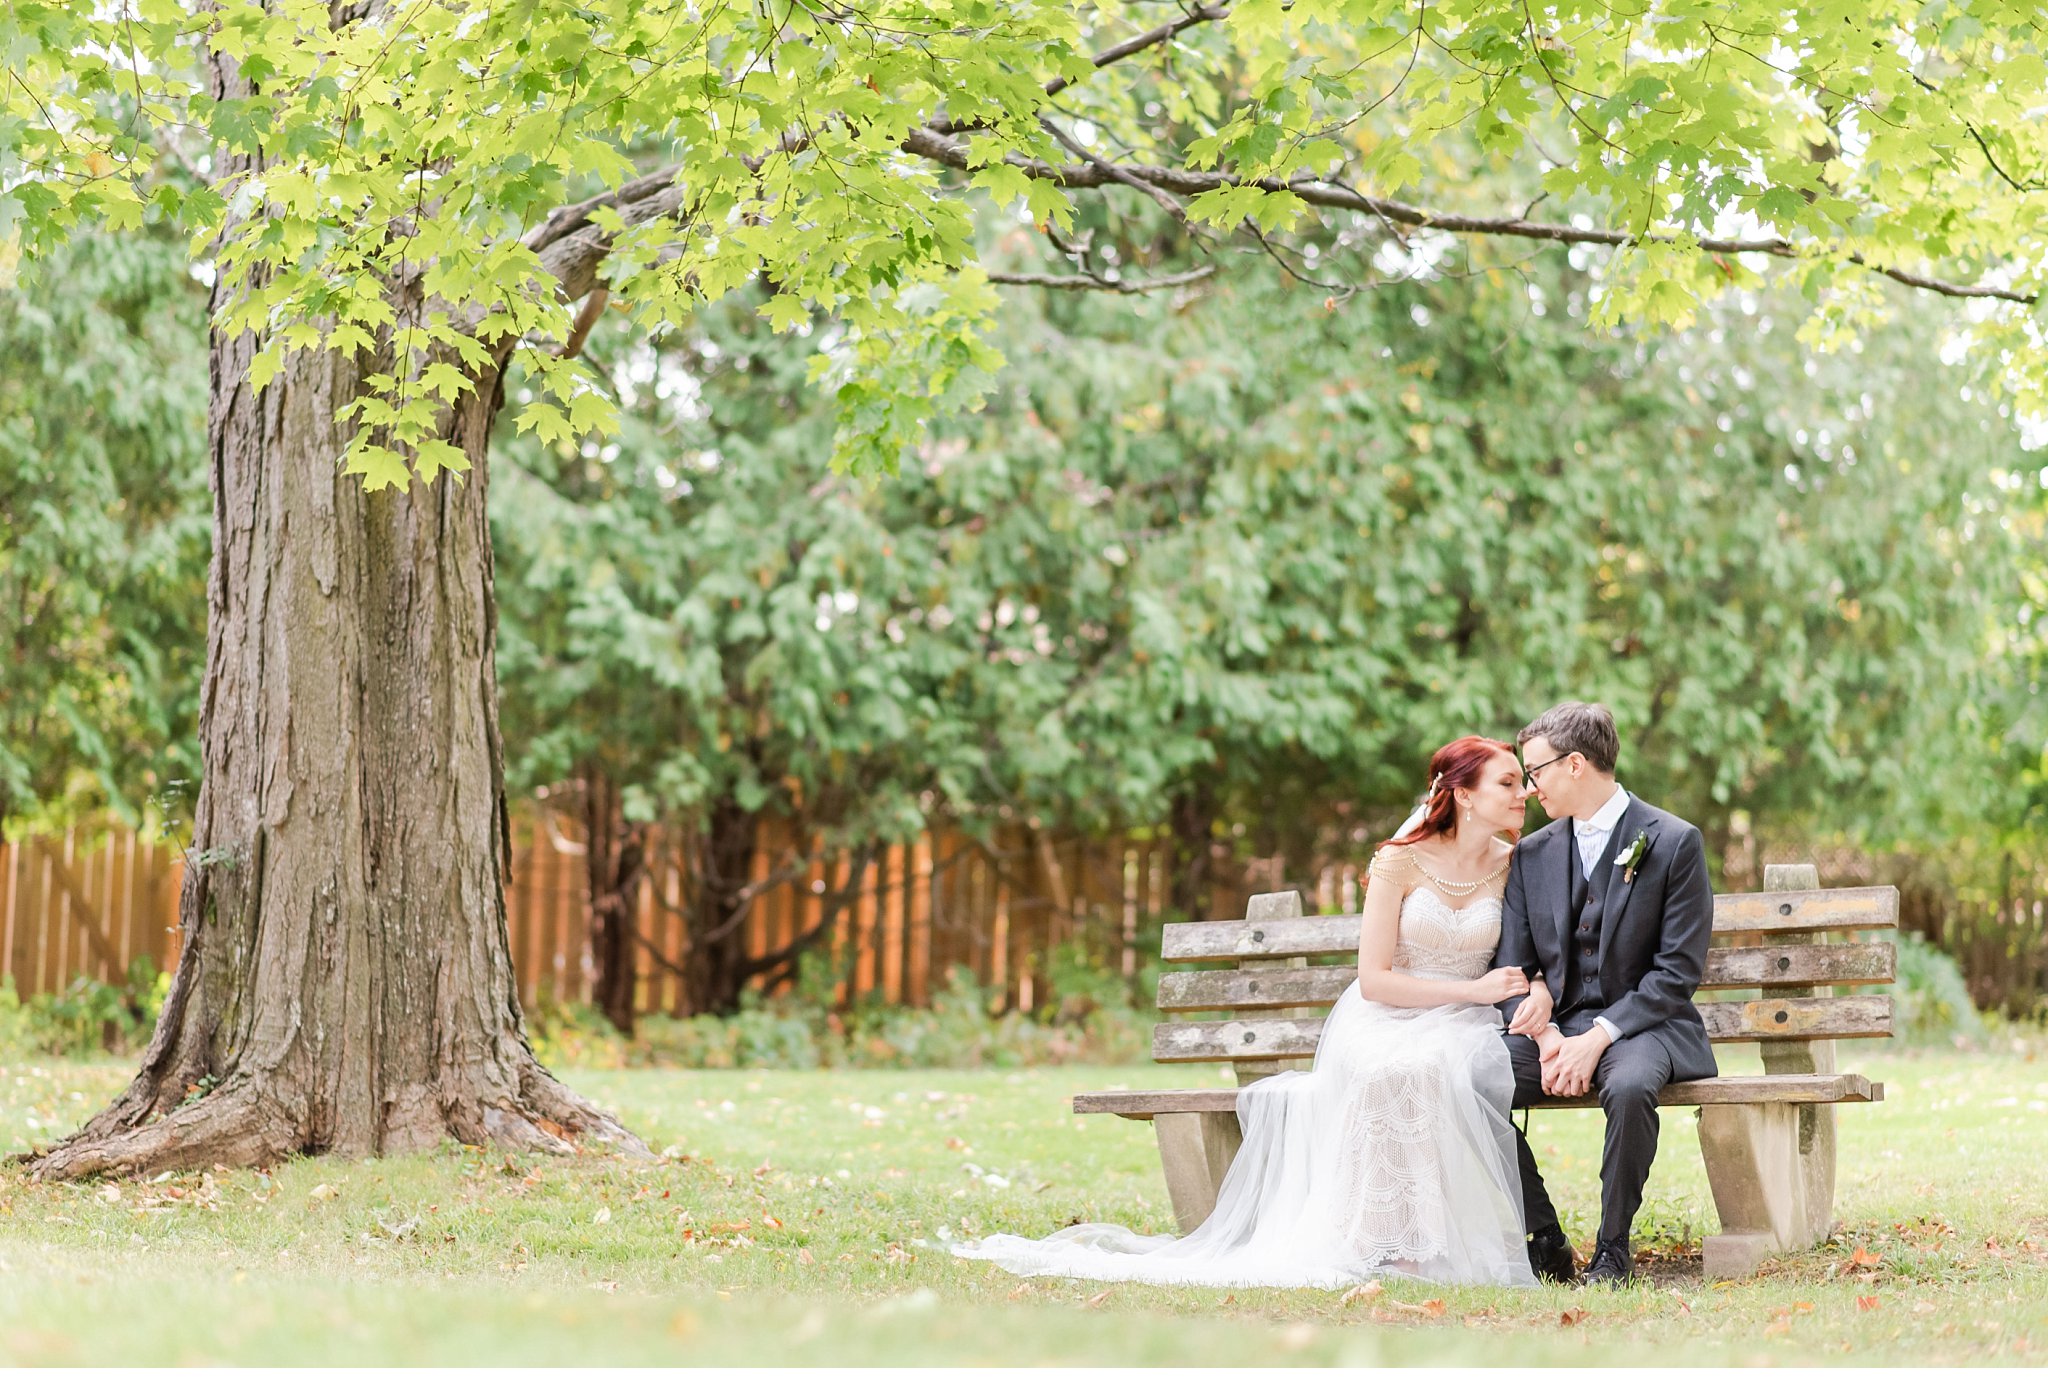 a beautiful fall wedding at windermere manor in london ontario